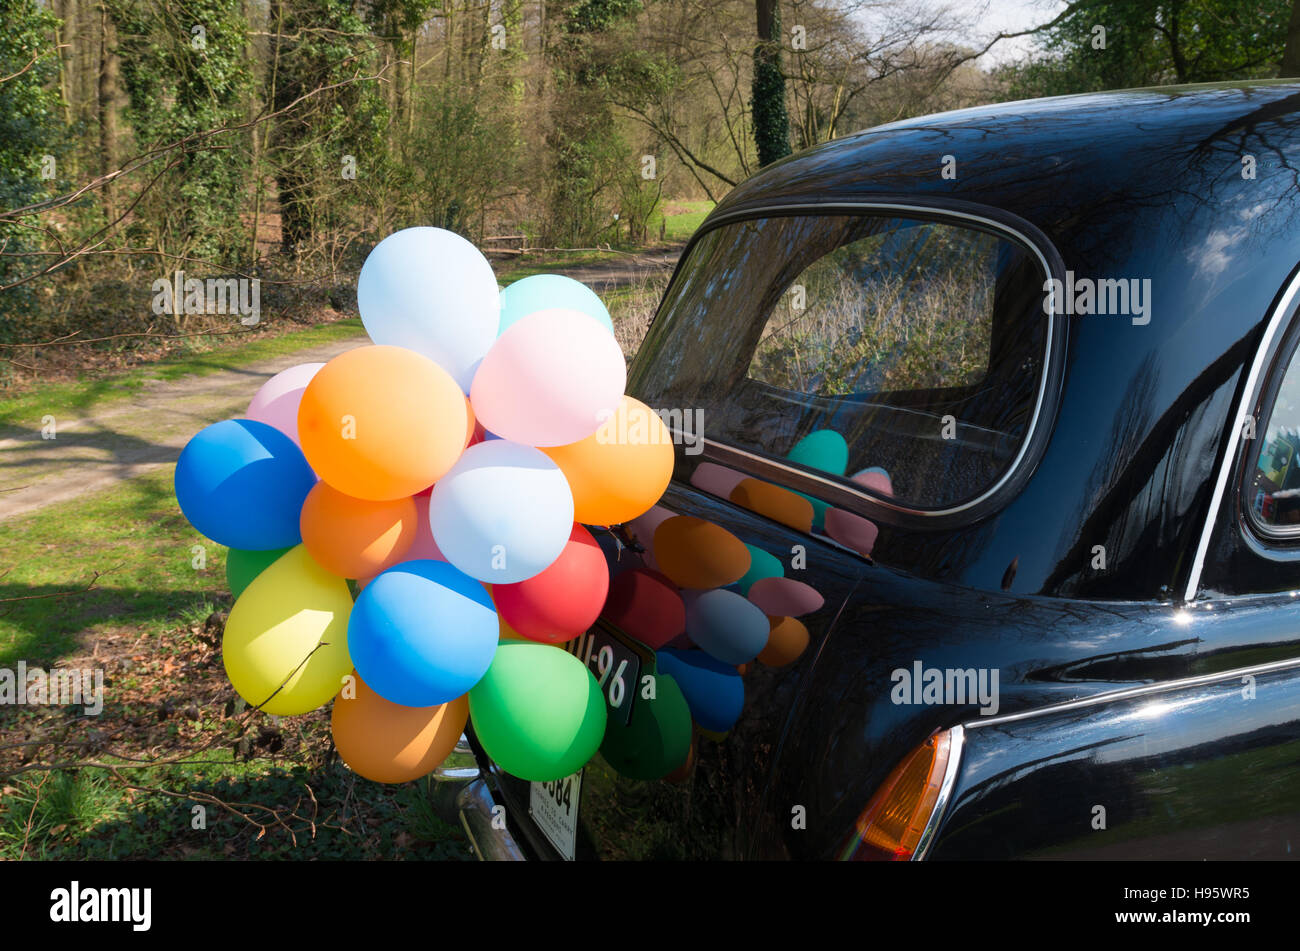 multi colored balloons on the back of a black vintage car Stock Photo